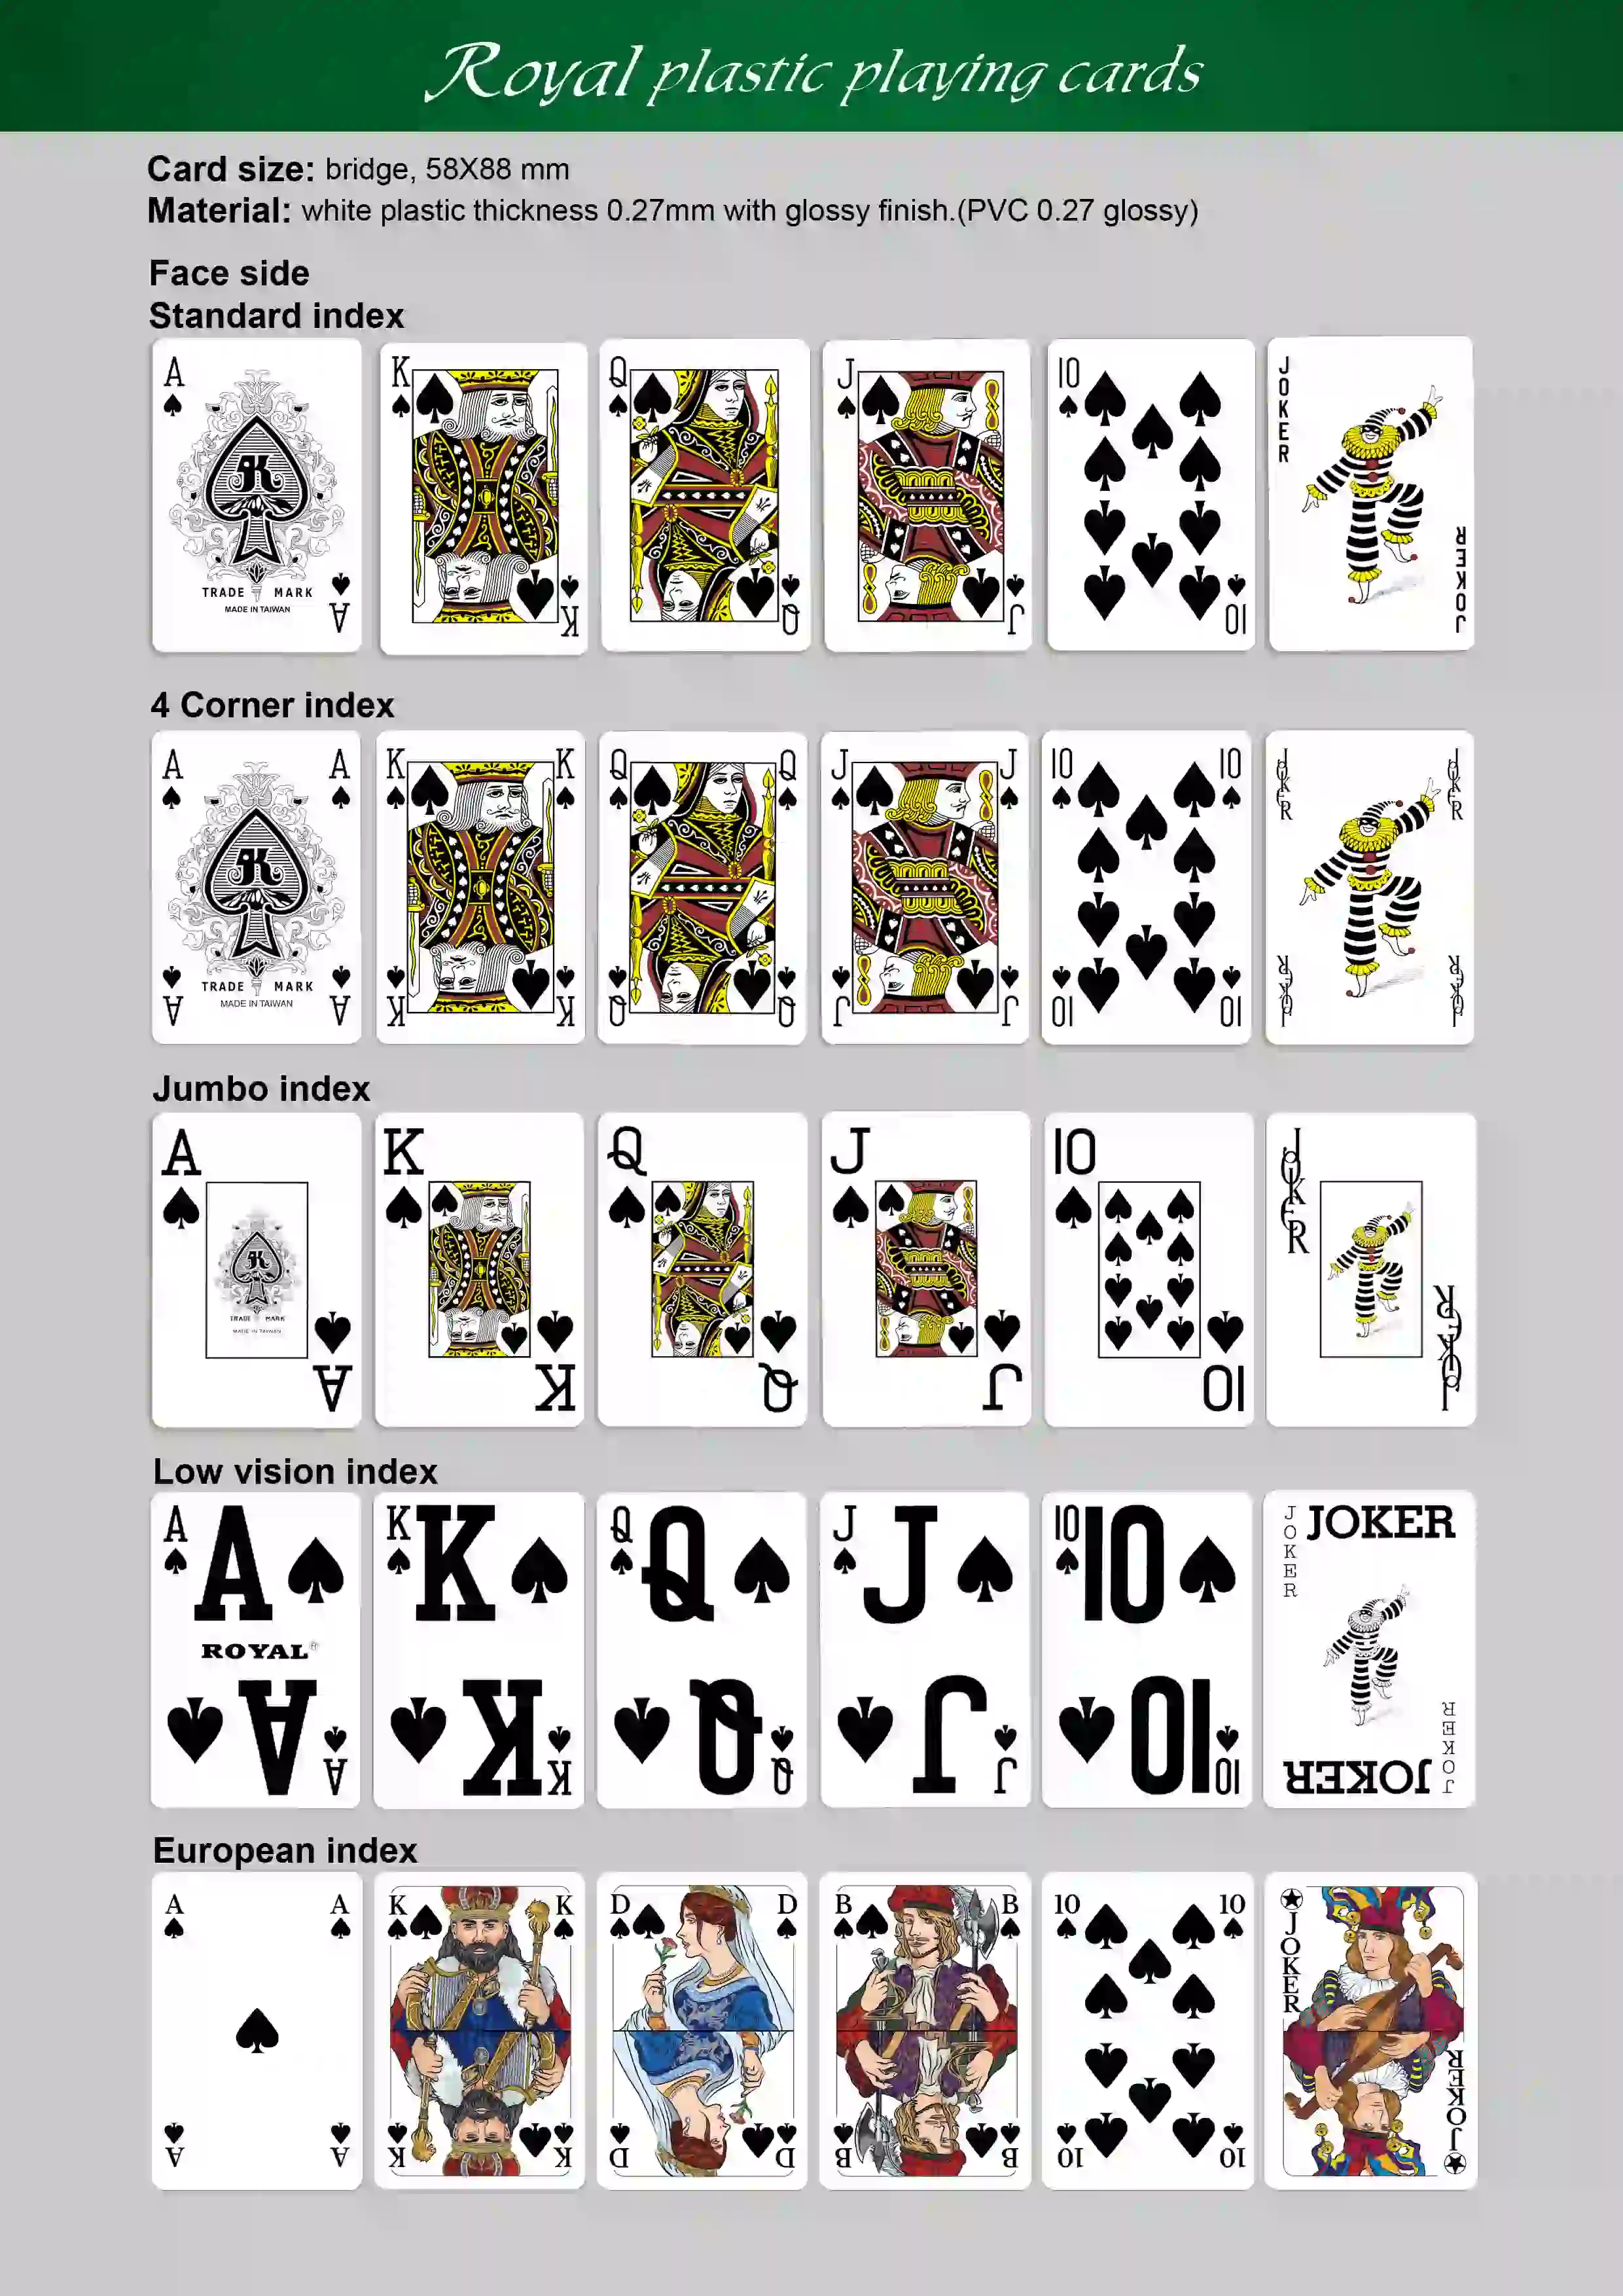 ROYAL Plastic Playing Cards - French Index